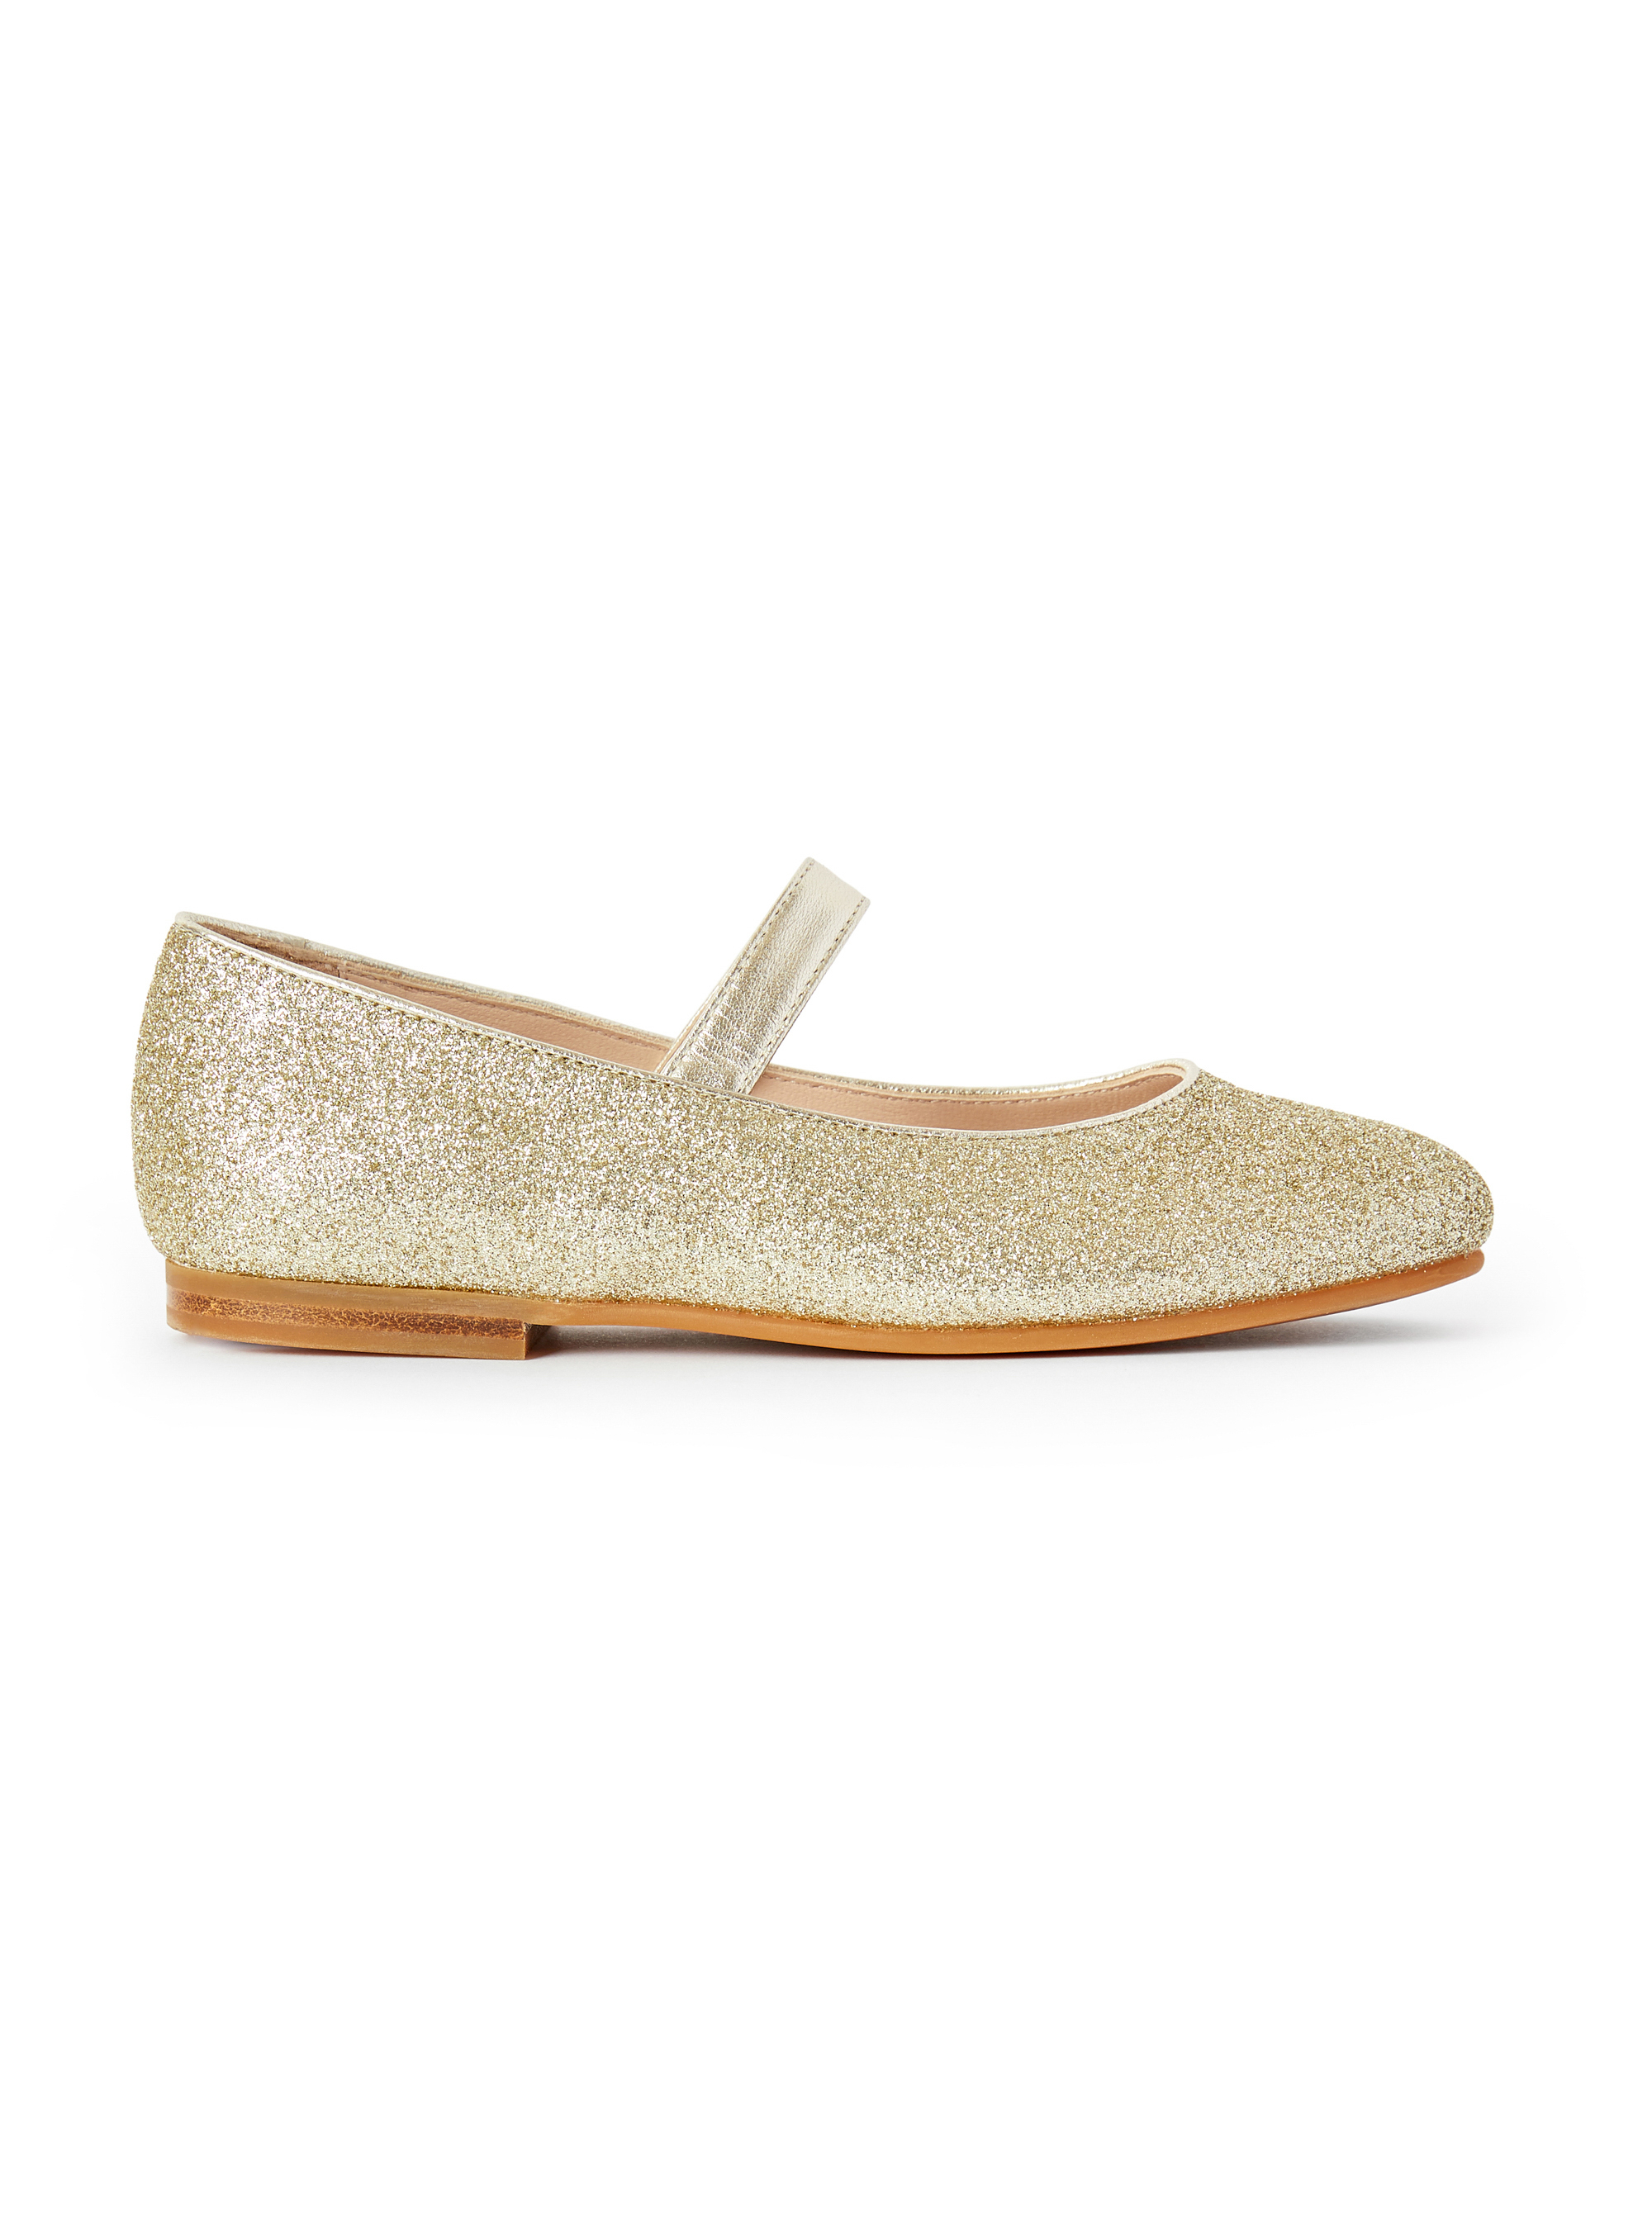 Flat shoes with gold glitter - Yellow | Il Gufo